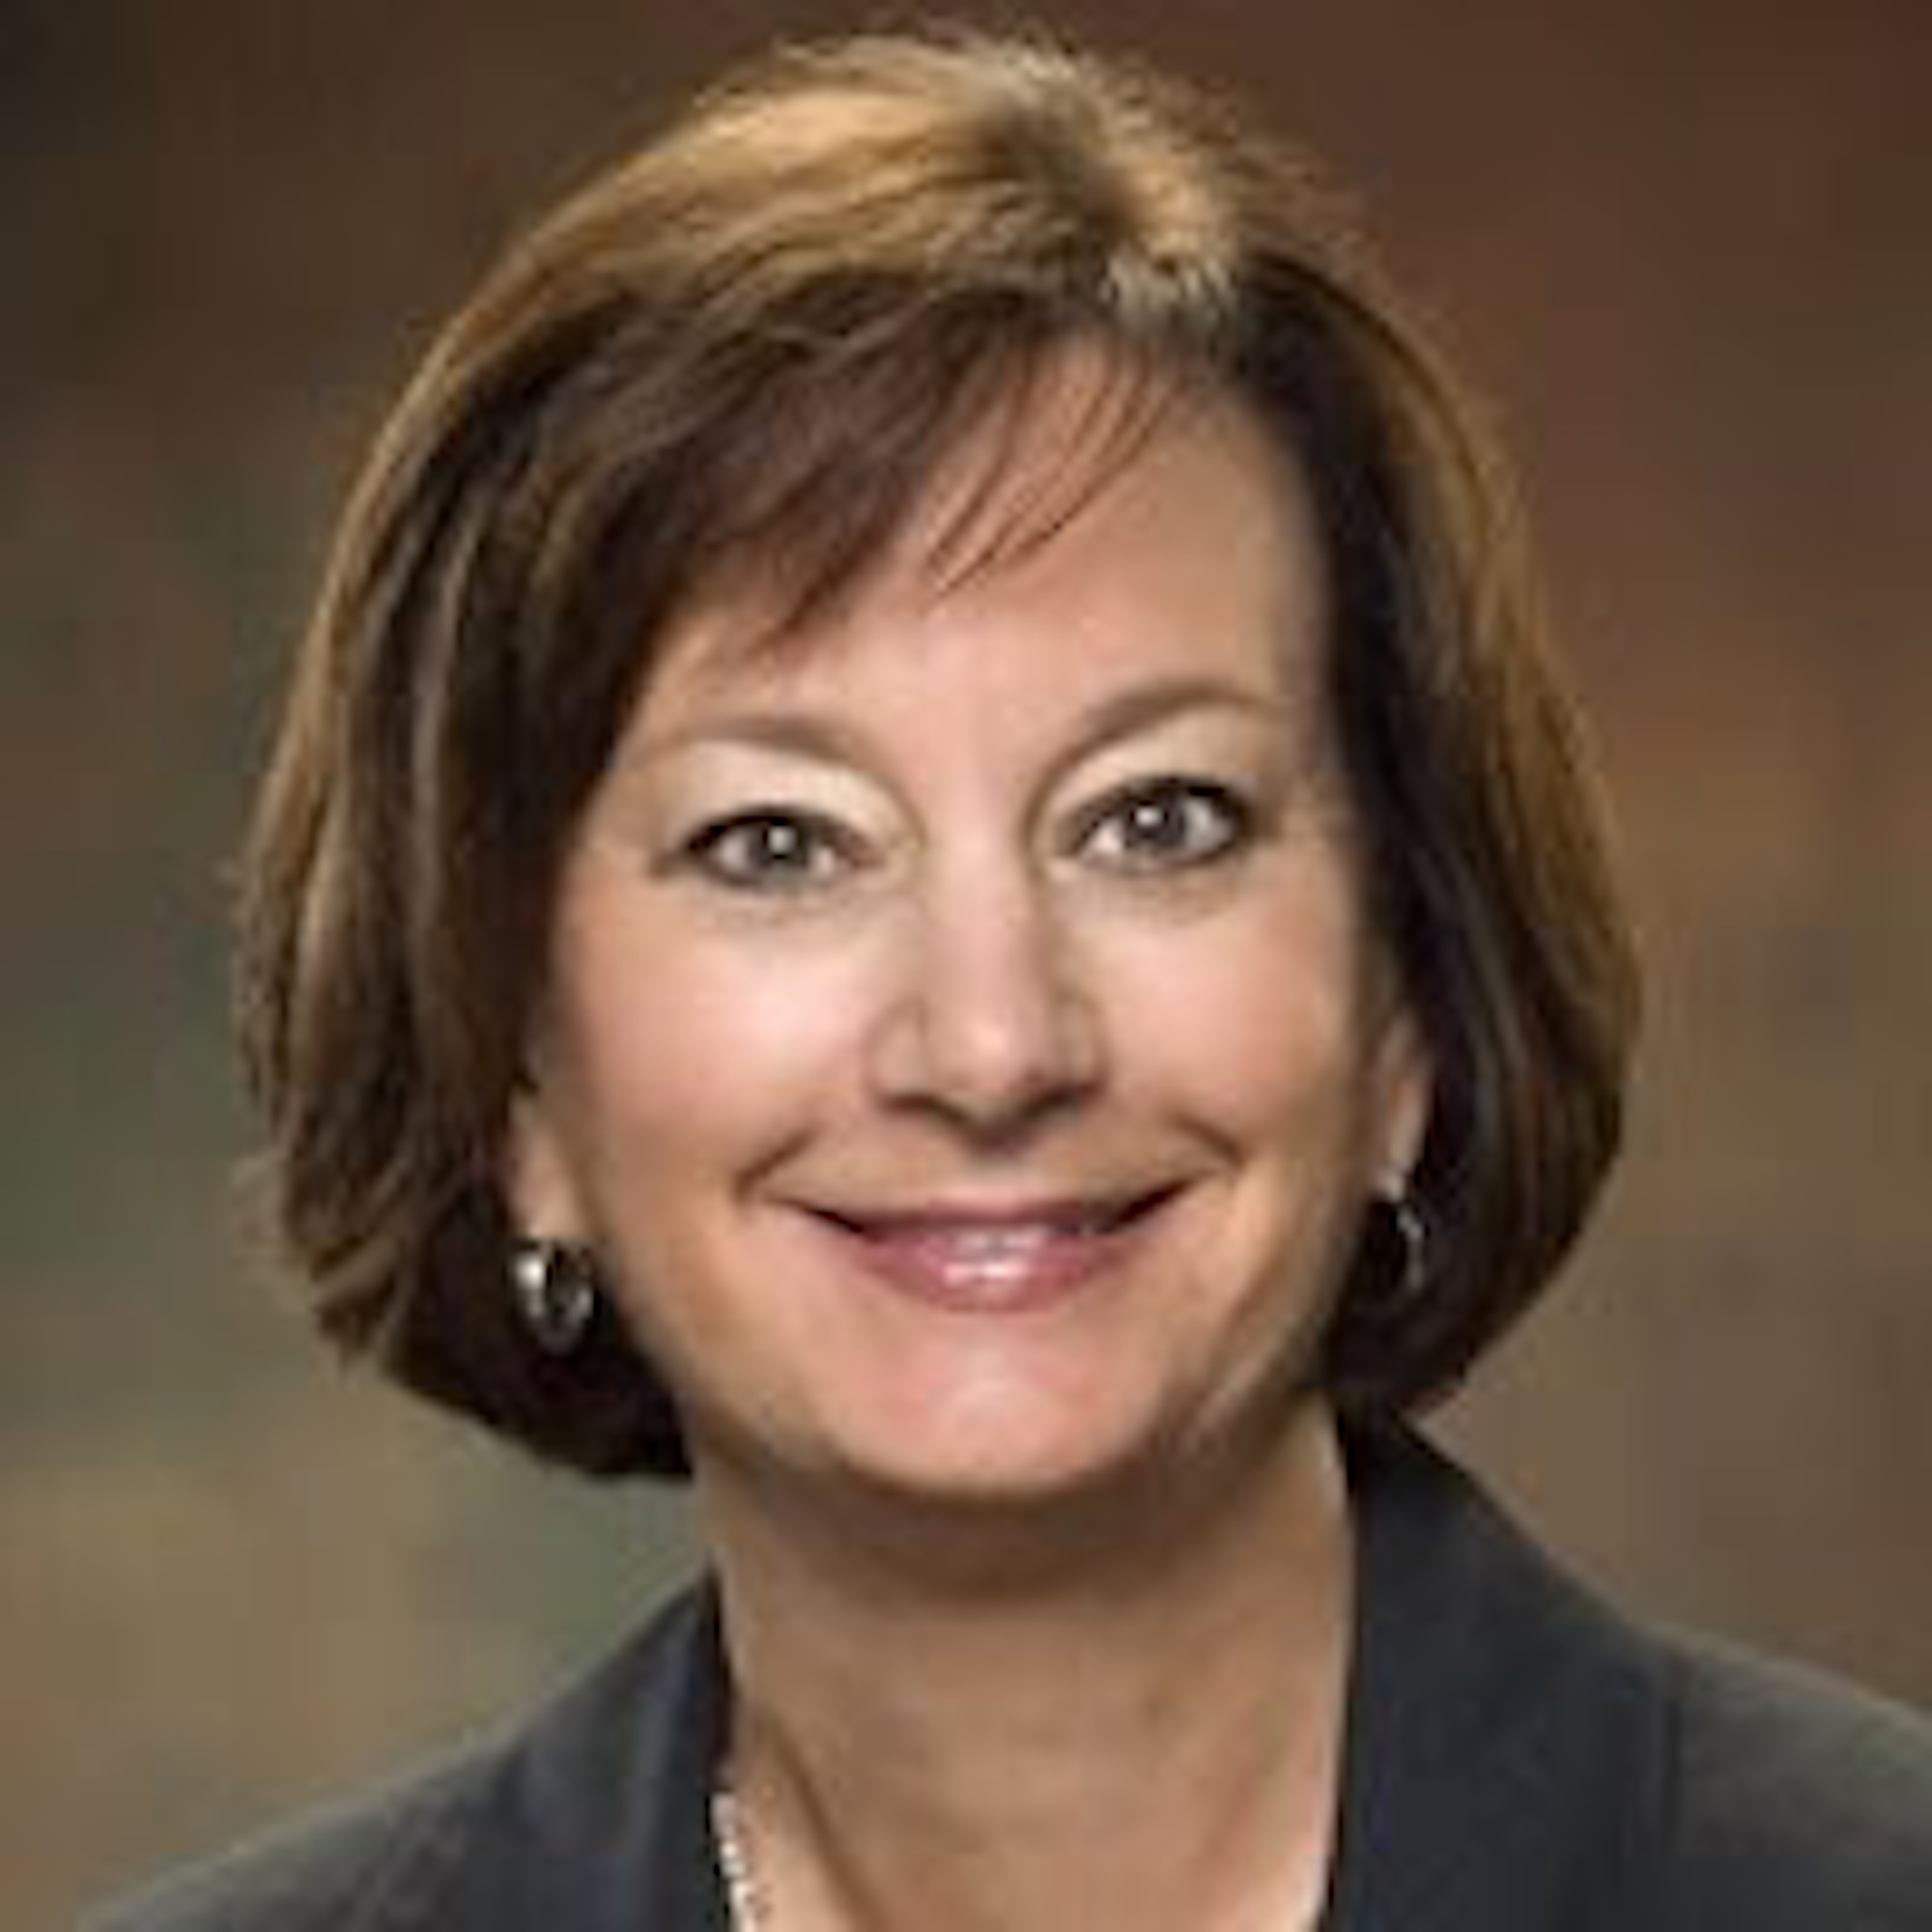 COURTESY PHOTO — Barbara Zipperian has been appointed to the board of directors for First Home Bancorp and First Home Bank.